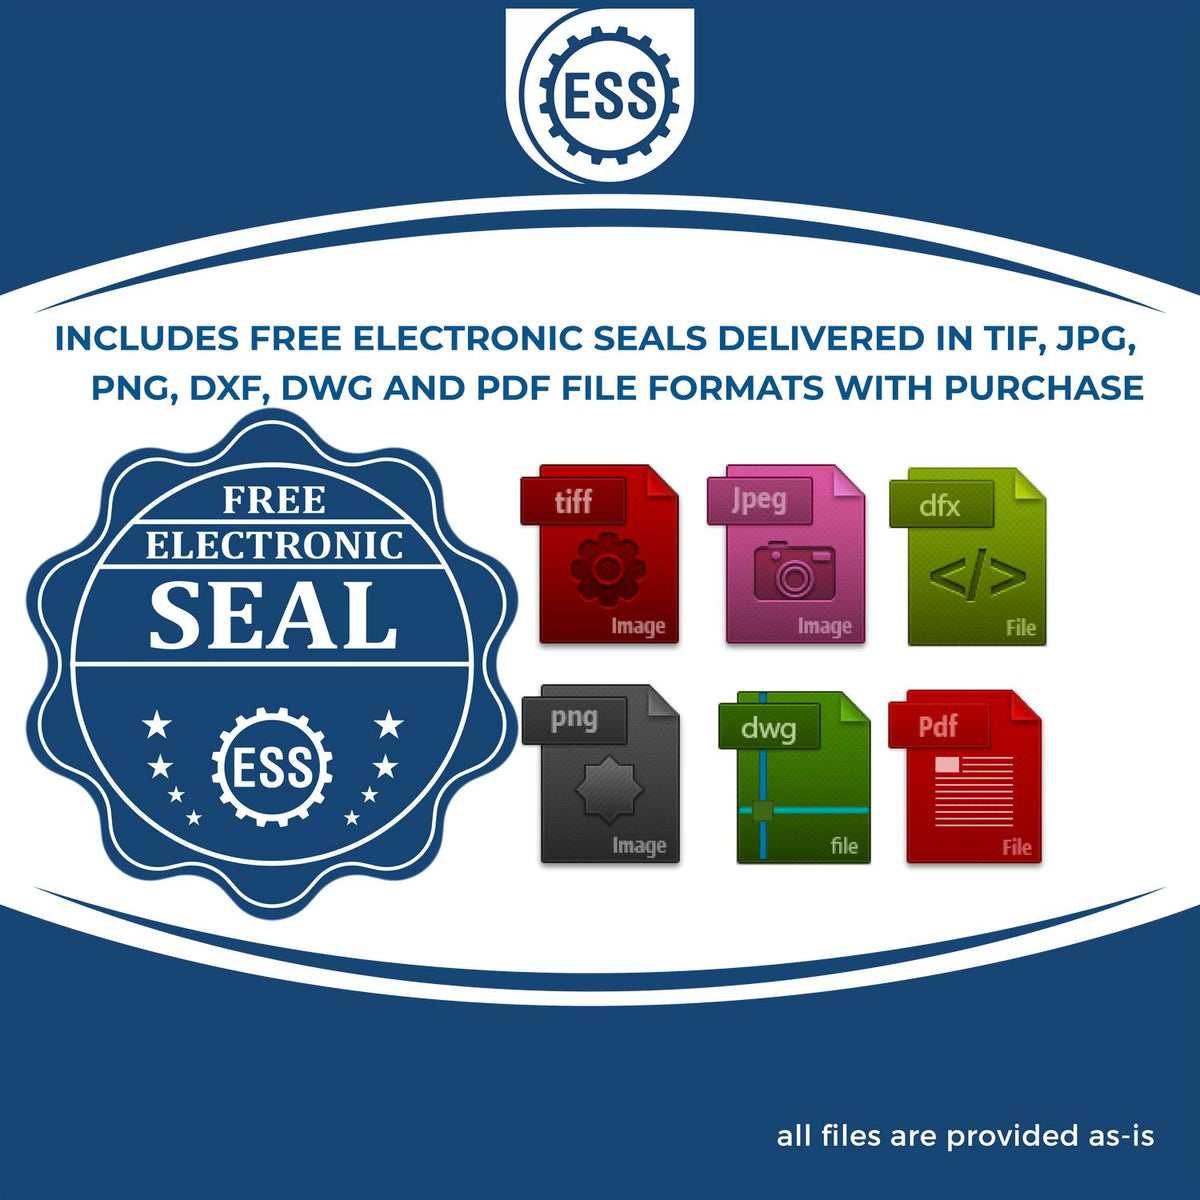 An infographic for the free electronic seal for the Heavy Duty Cast Iron Florida Land Surveyor Seal Embosser illustrating the different file type icons such as DXF, DWG, TIF, JPG and PNG.